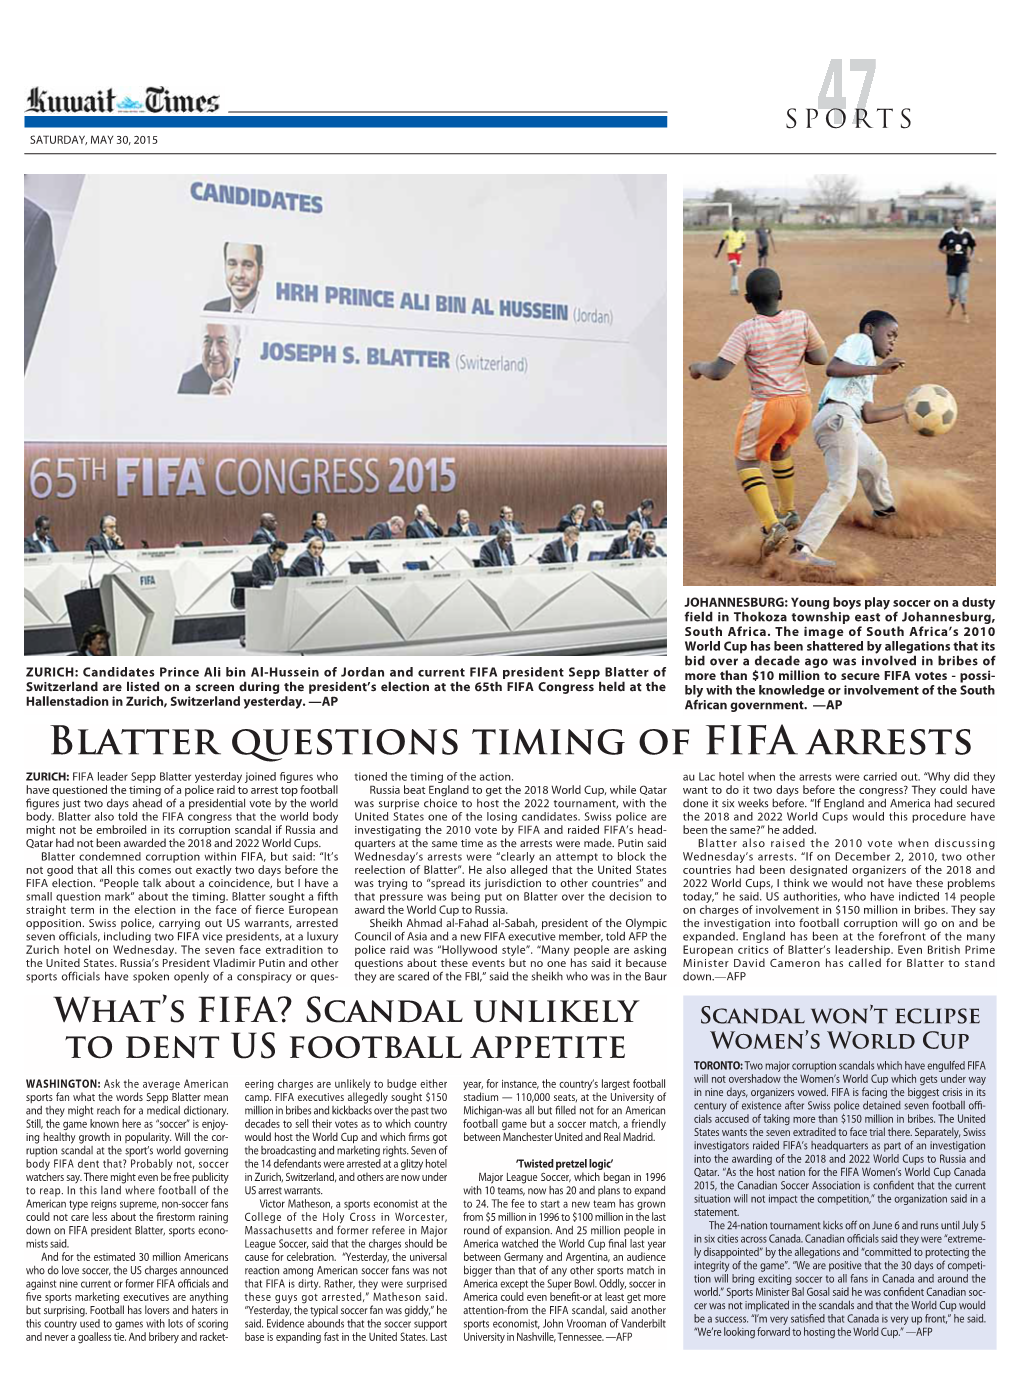 Blatter Questions Timing of FIFA Arrests